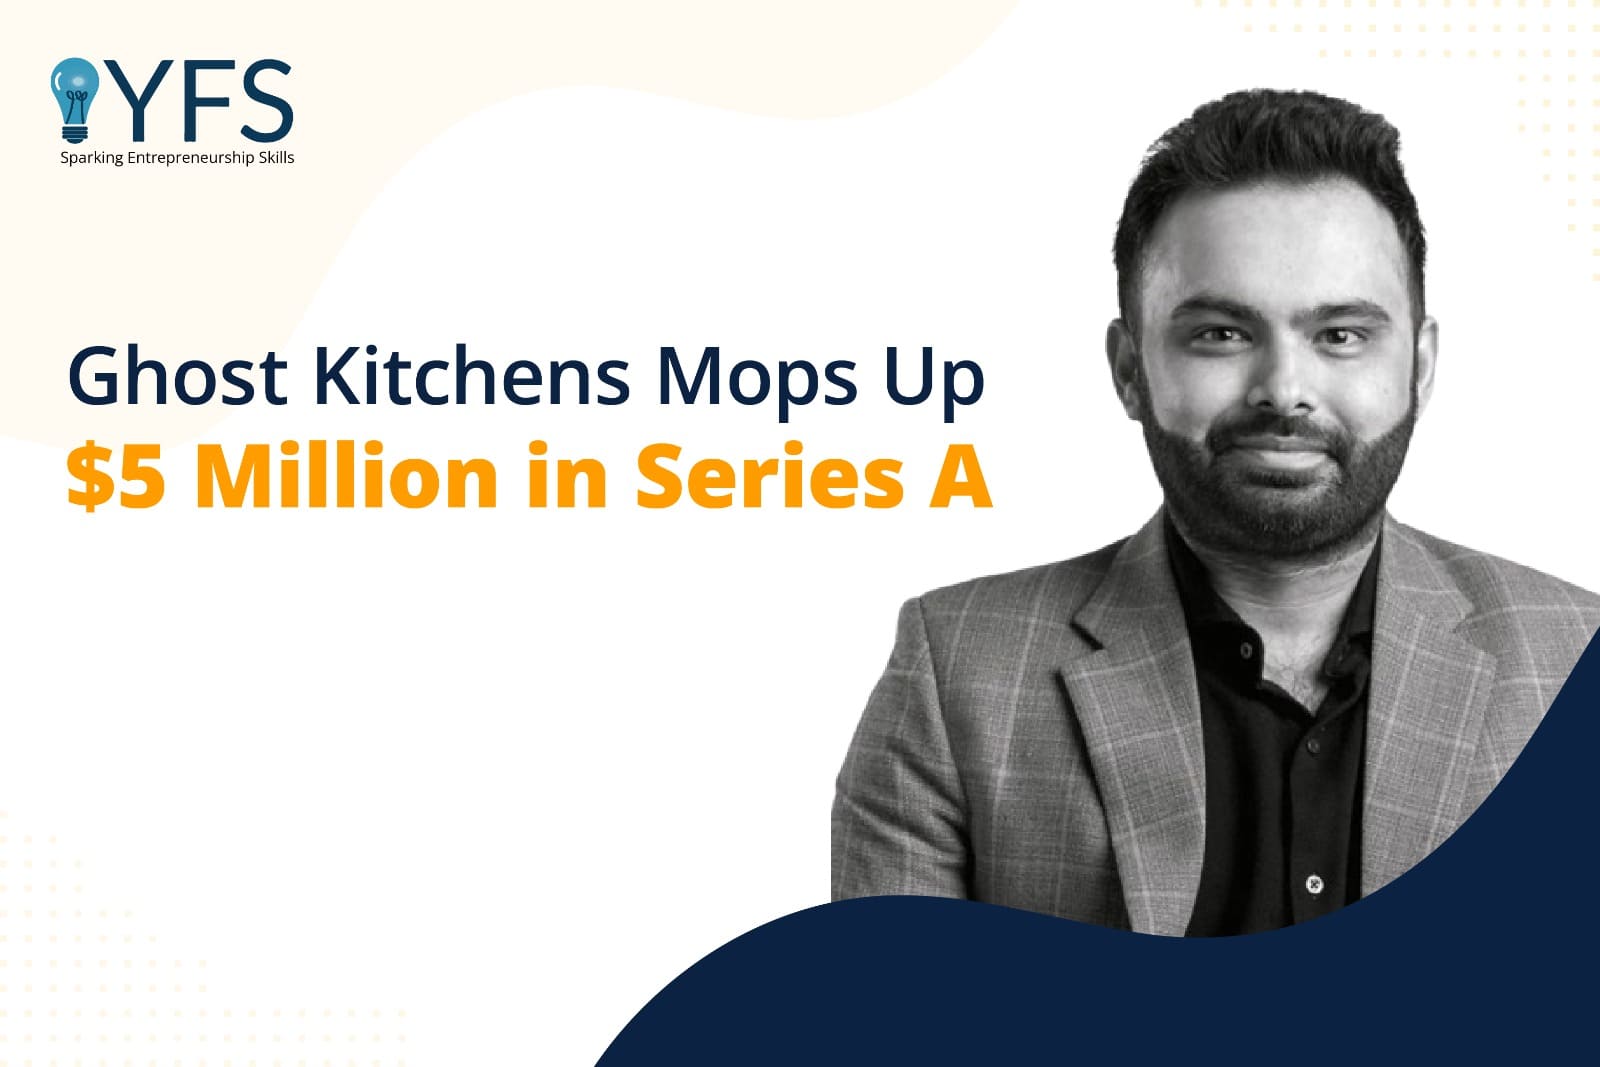 Ghost Kitchens Mops Up $5 Million in Series A